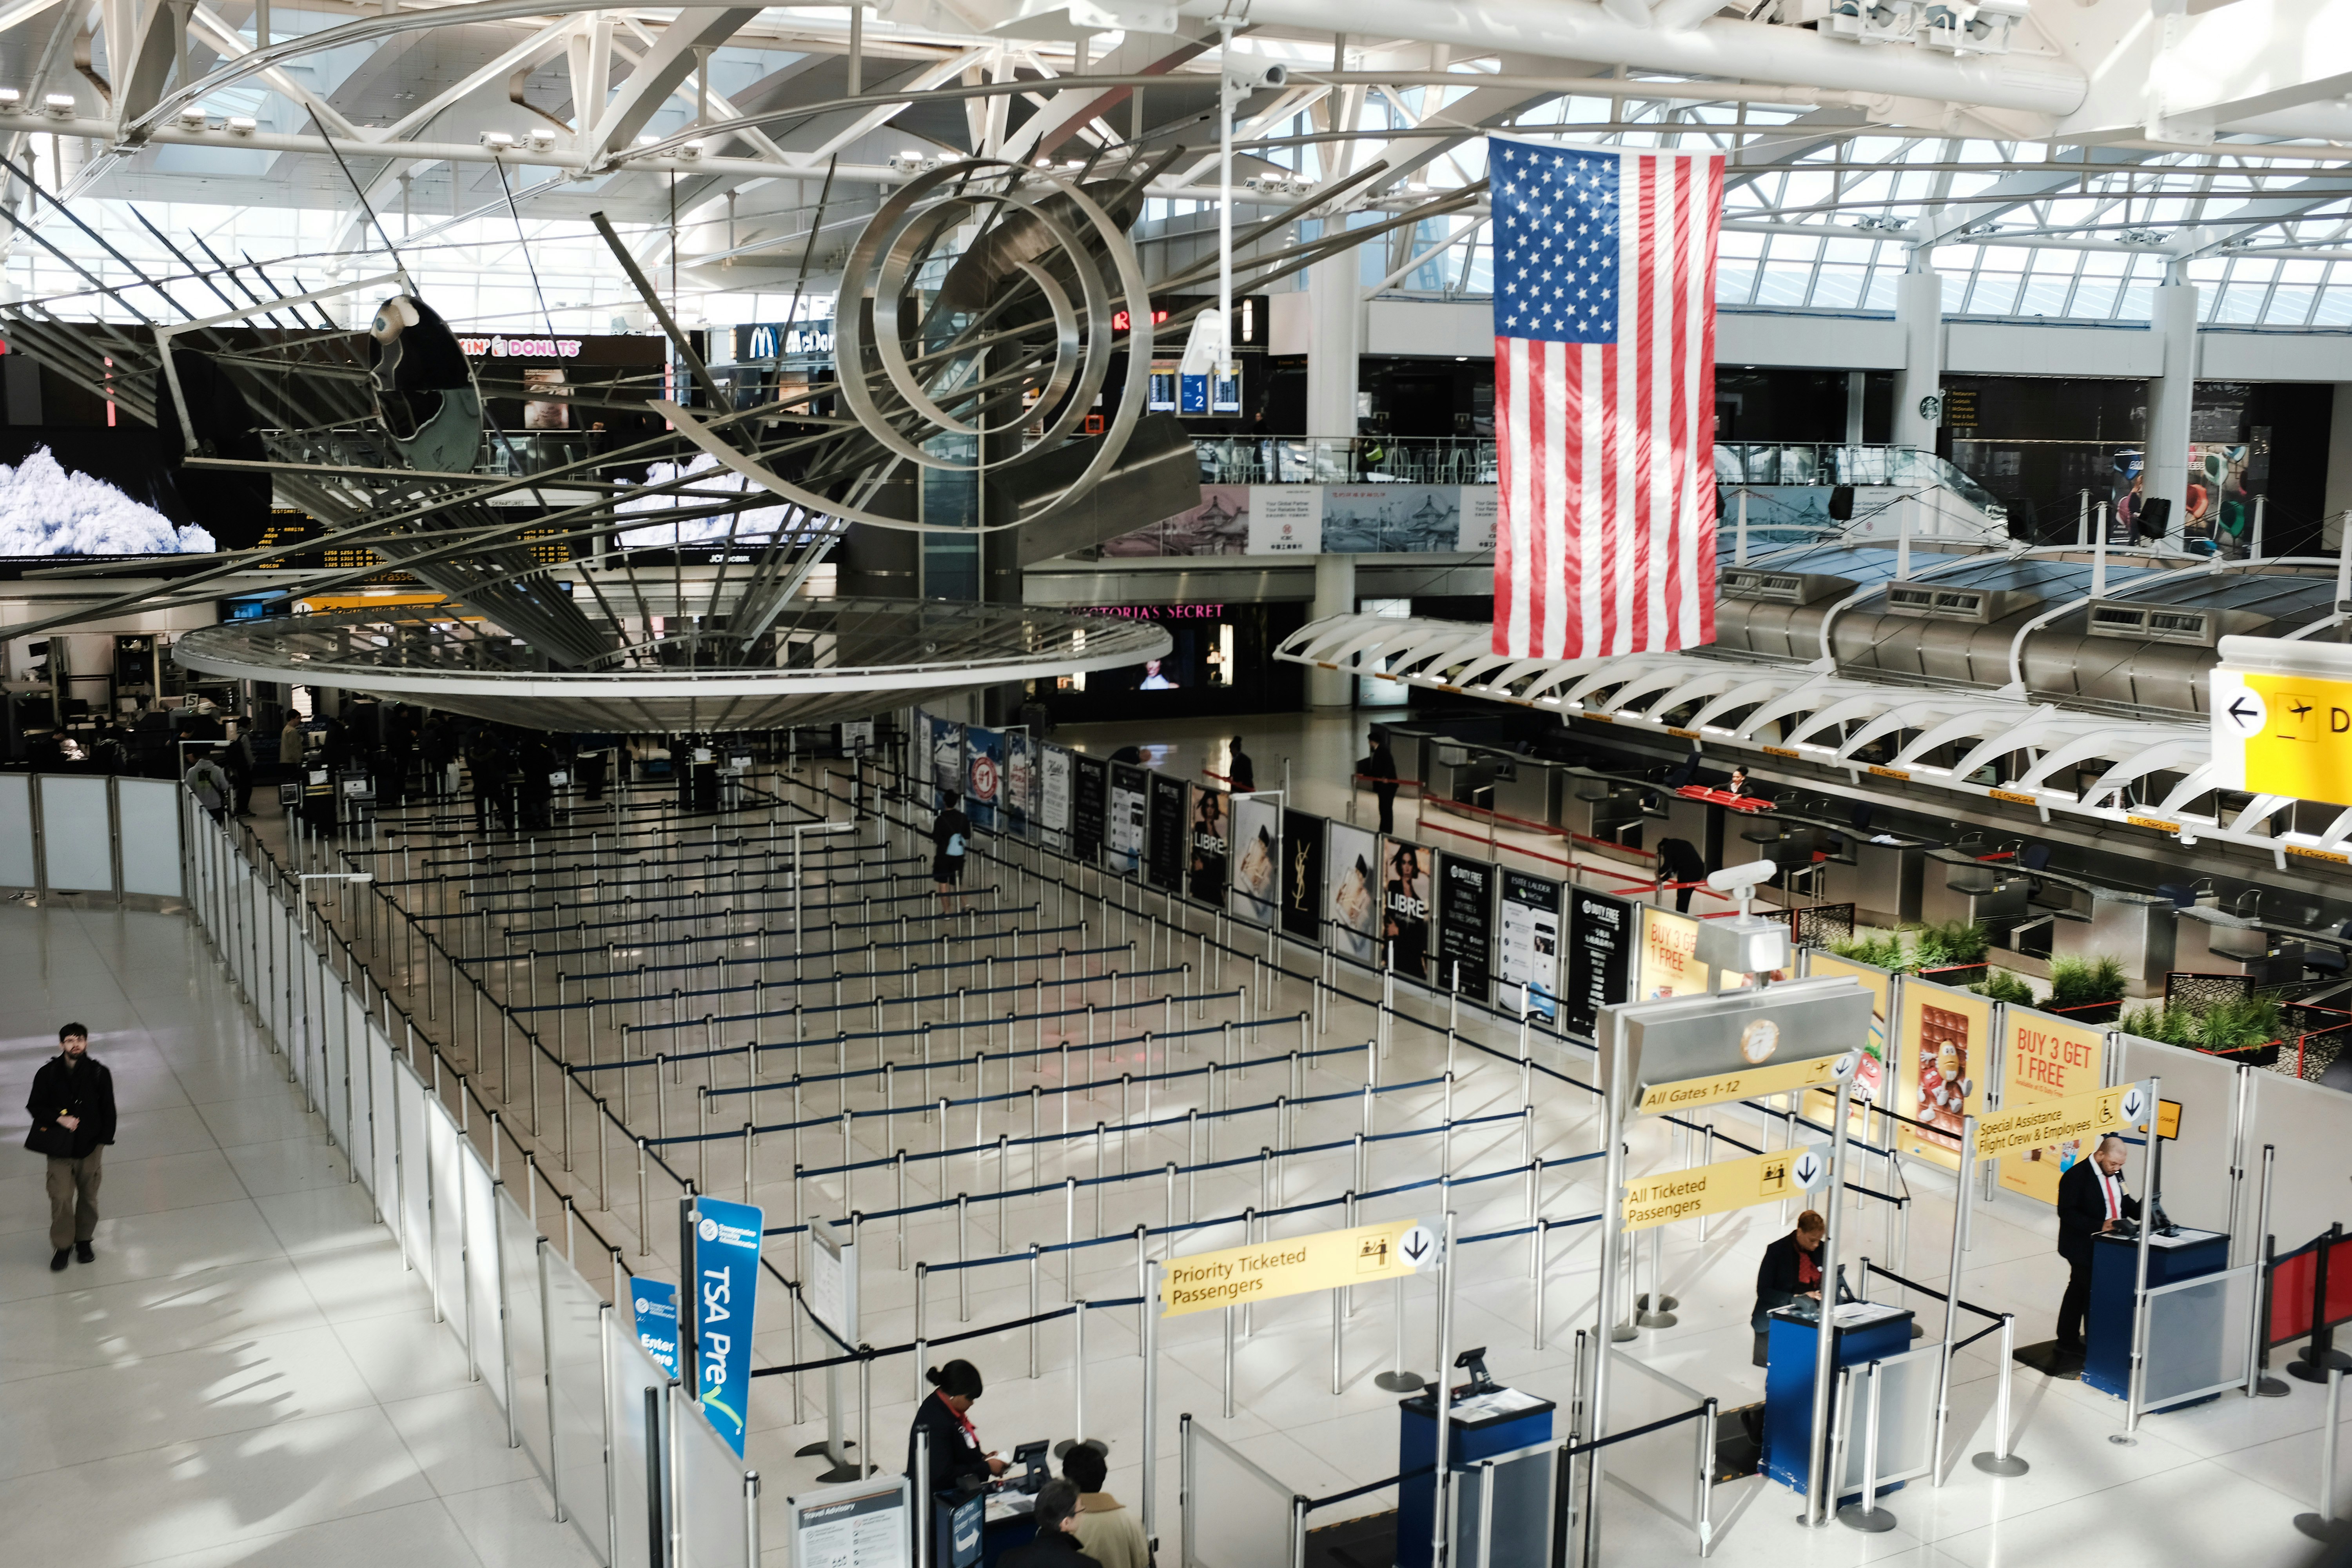 An empty line-up at an airport. An American flag and some installations hang overhead